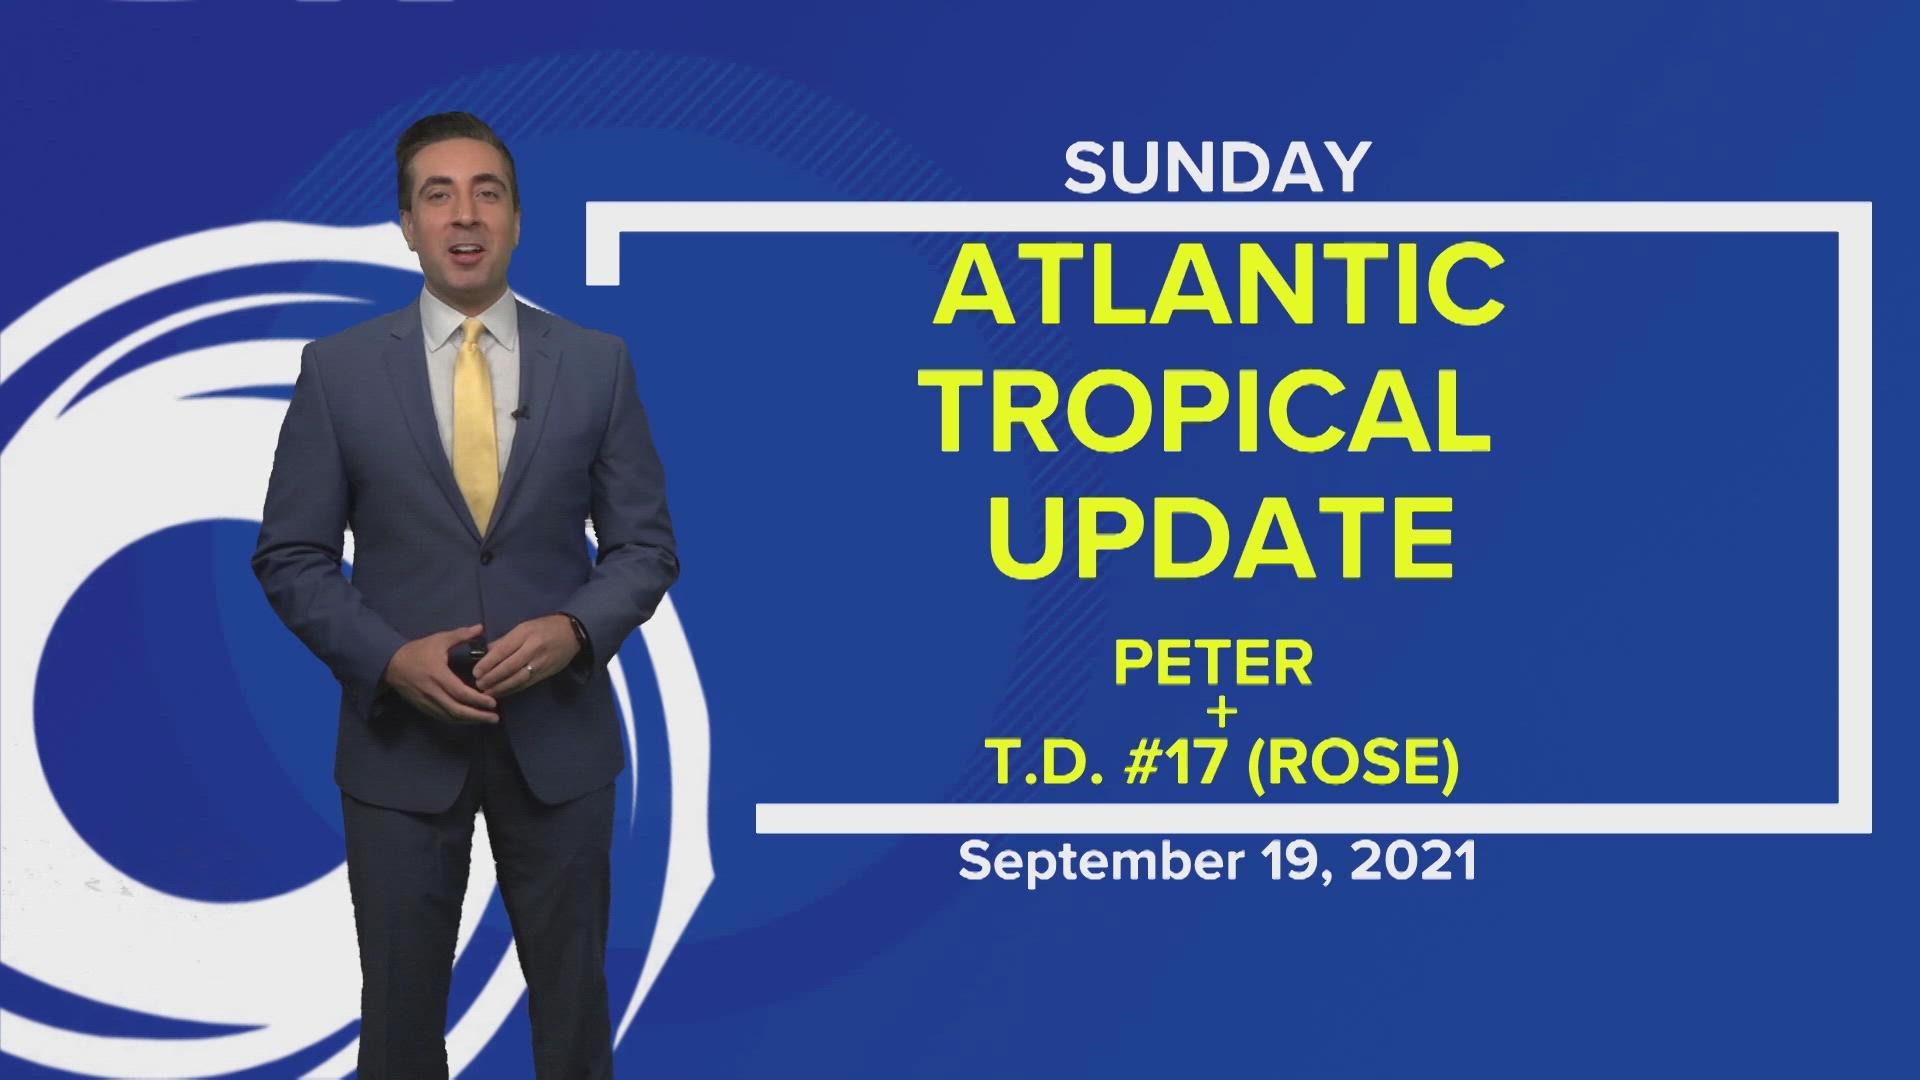 Tropical Storm Peter has formed becoming the 16th named storm of 2021. The forecast track, for now, keeps it clear of land over the next 5 days.